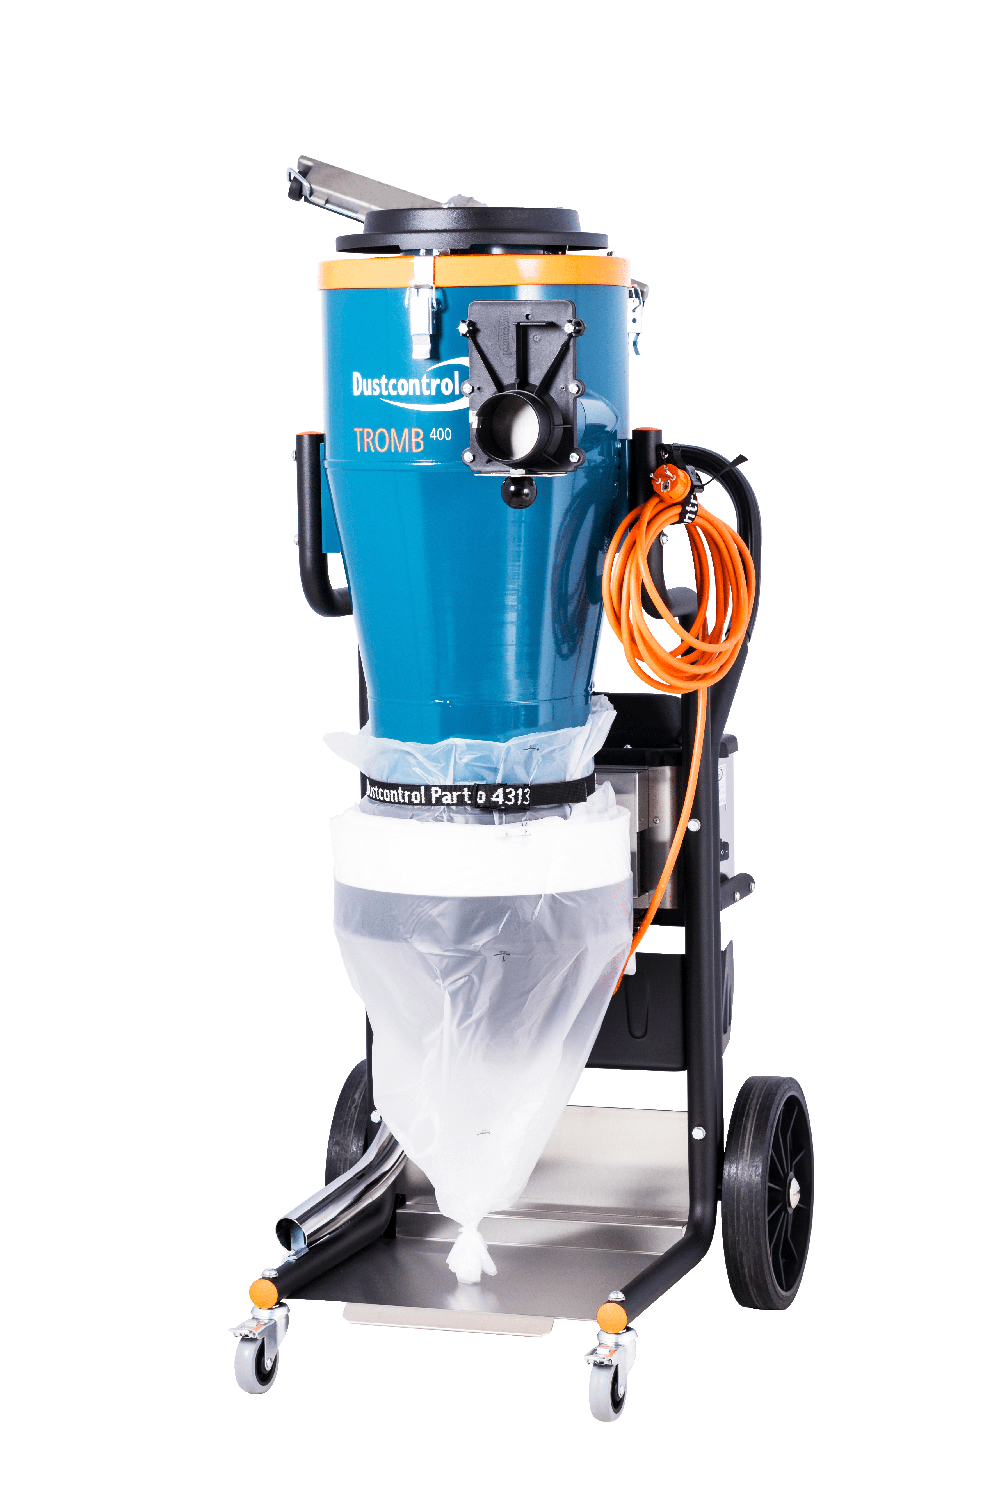 Tromb 400L Dust Collector - Xtreme Polishing Systems: dust collectors, dust control vacuums, and concrete grinding vacuums.